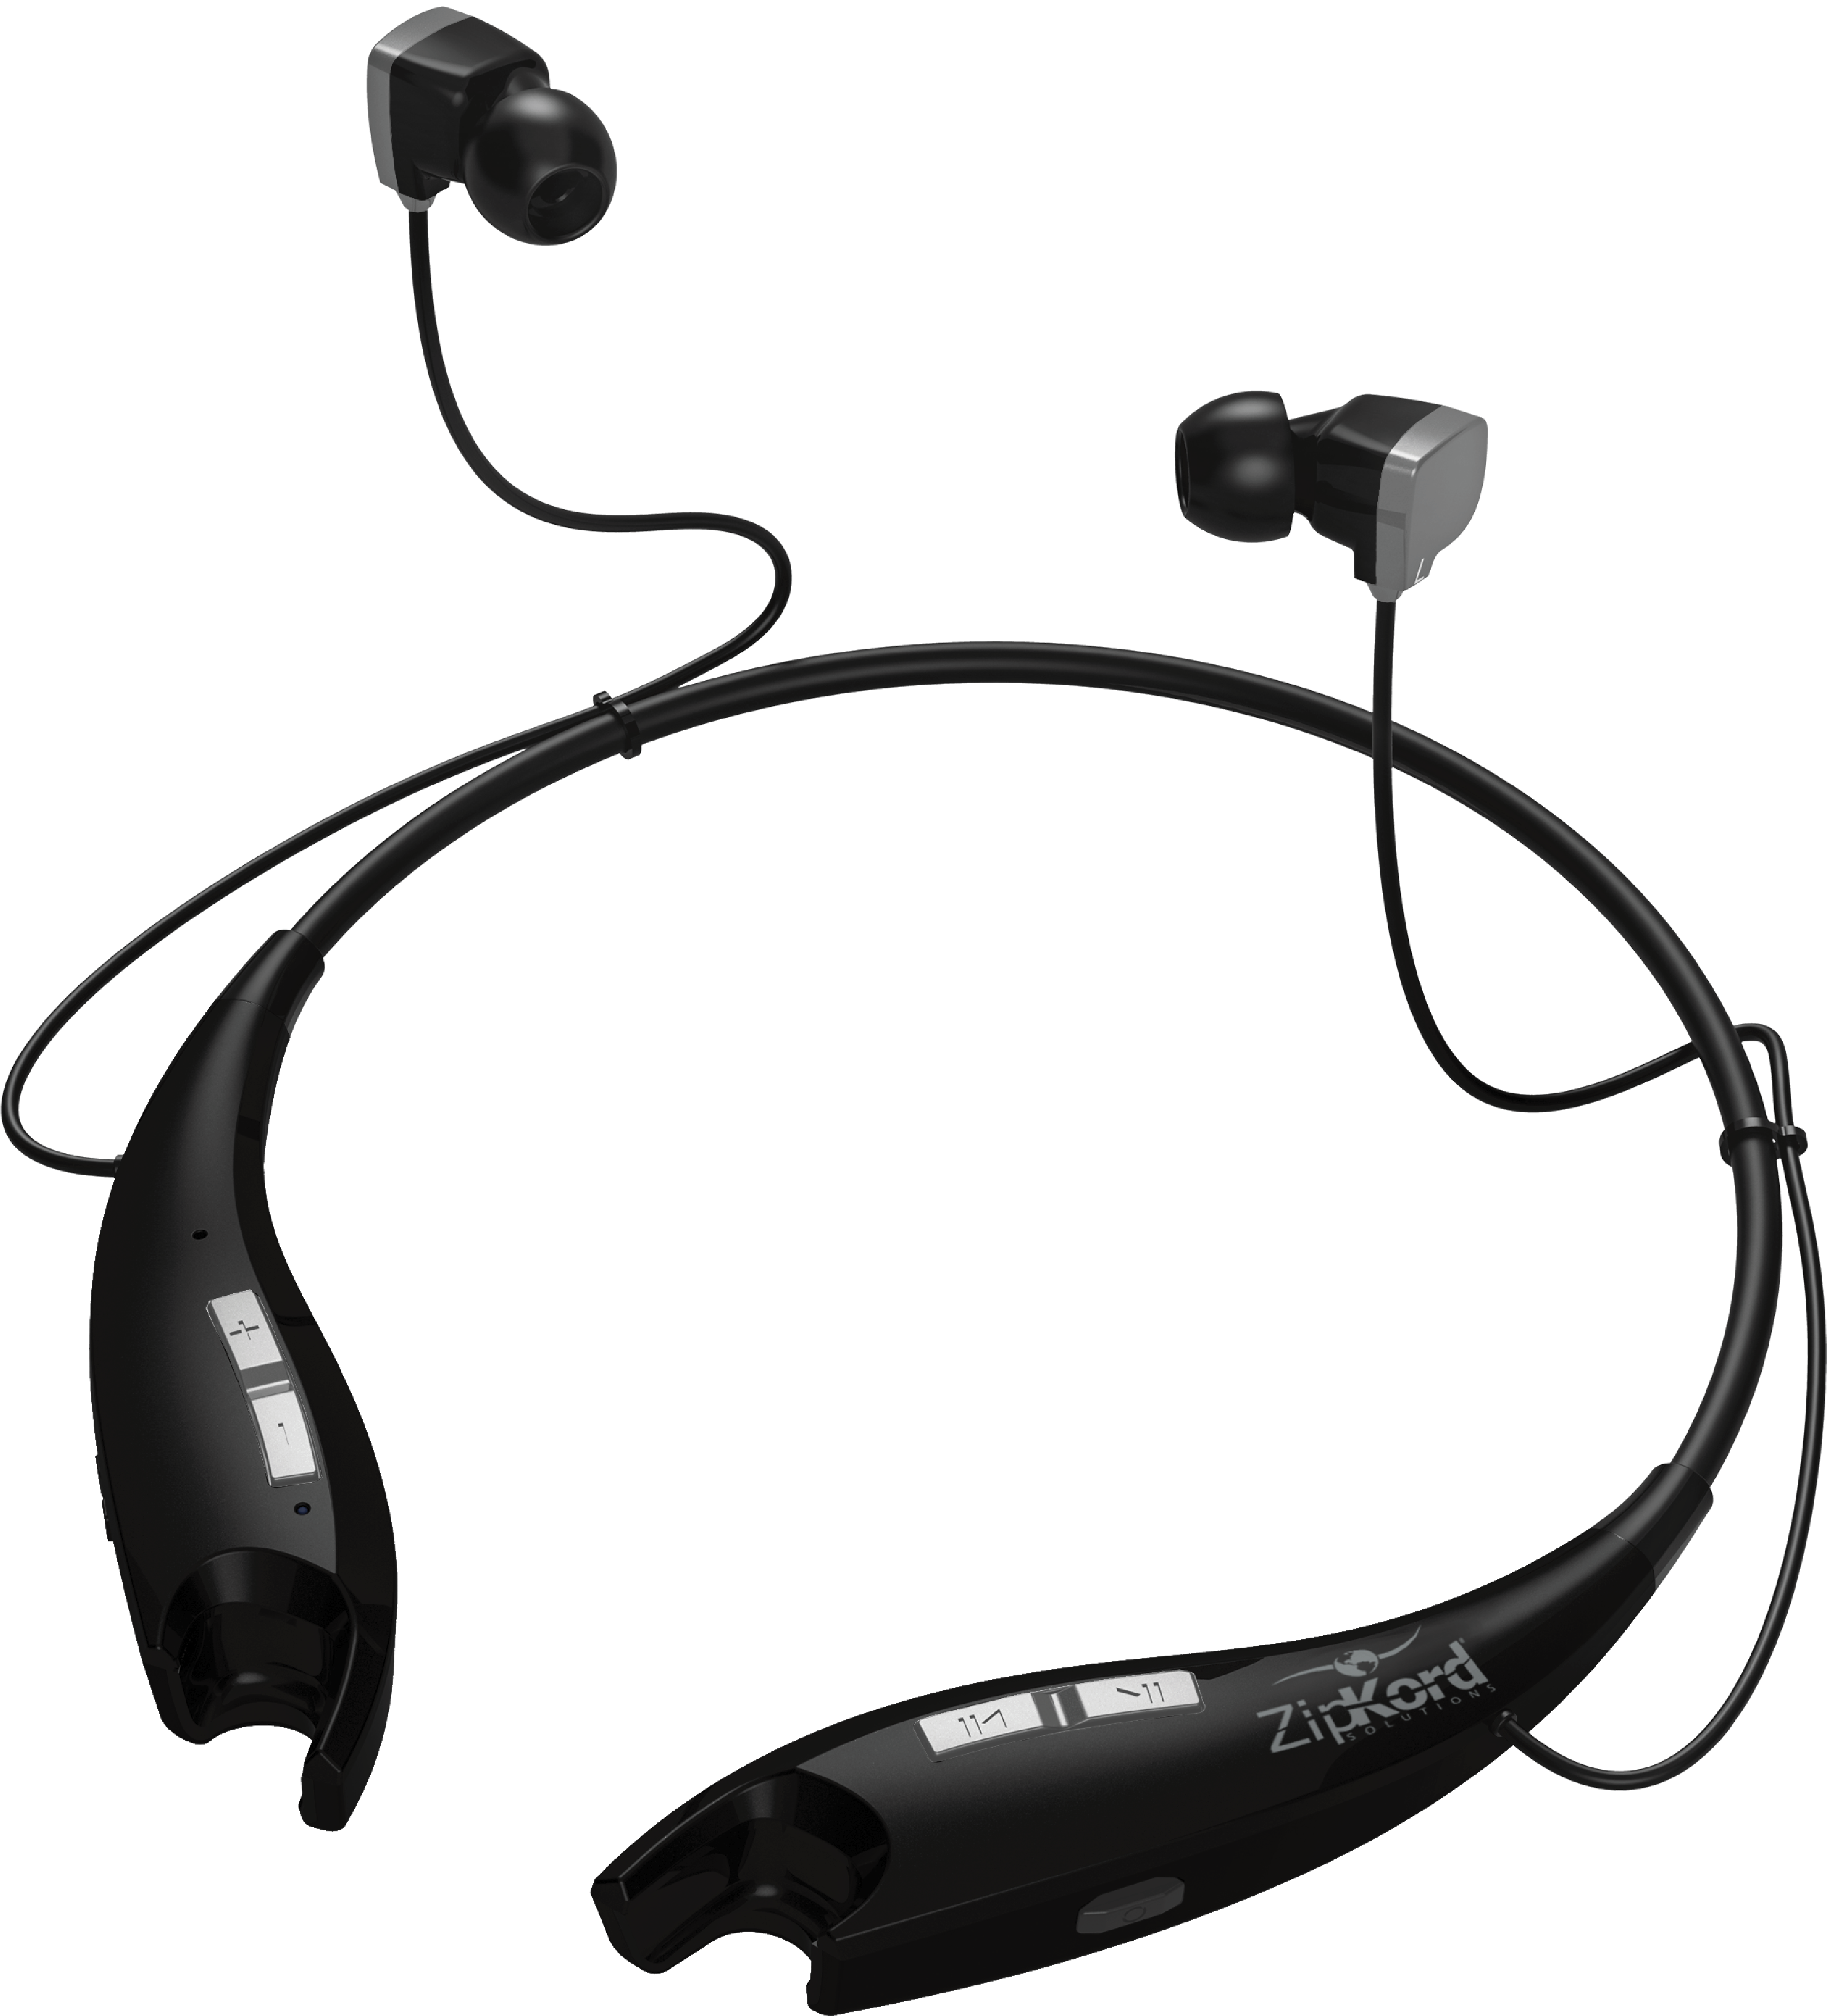 Headset PNG Clipart Background